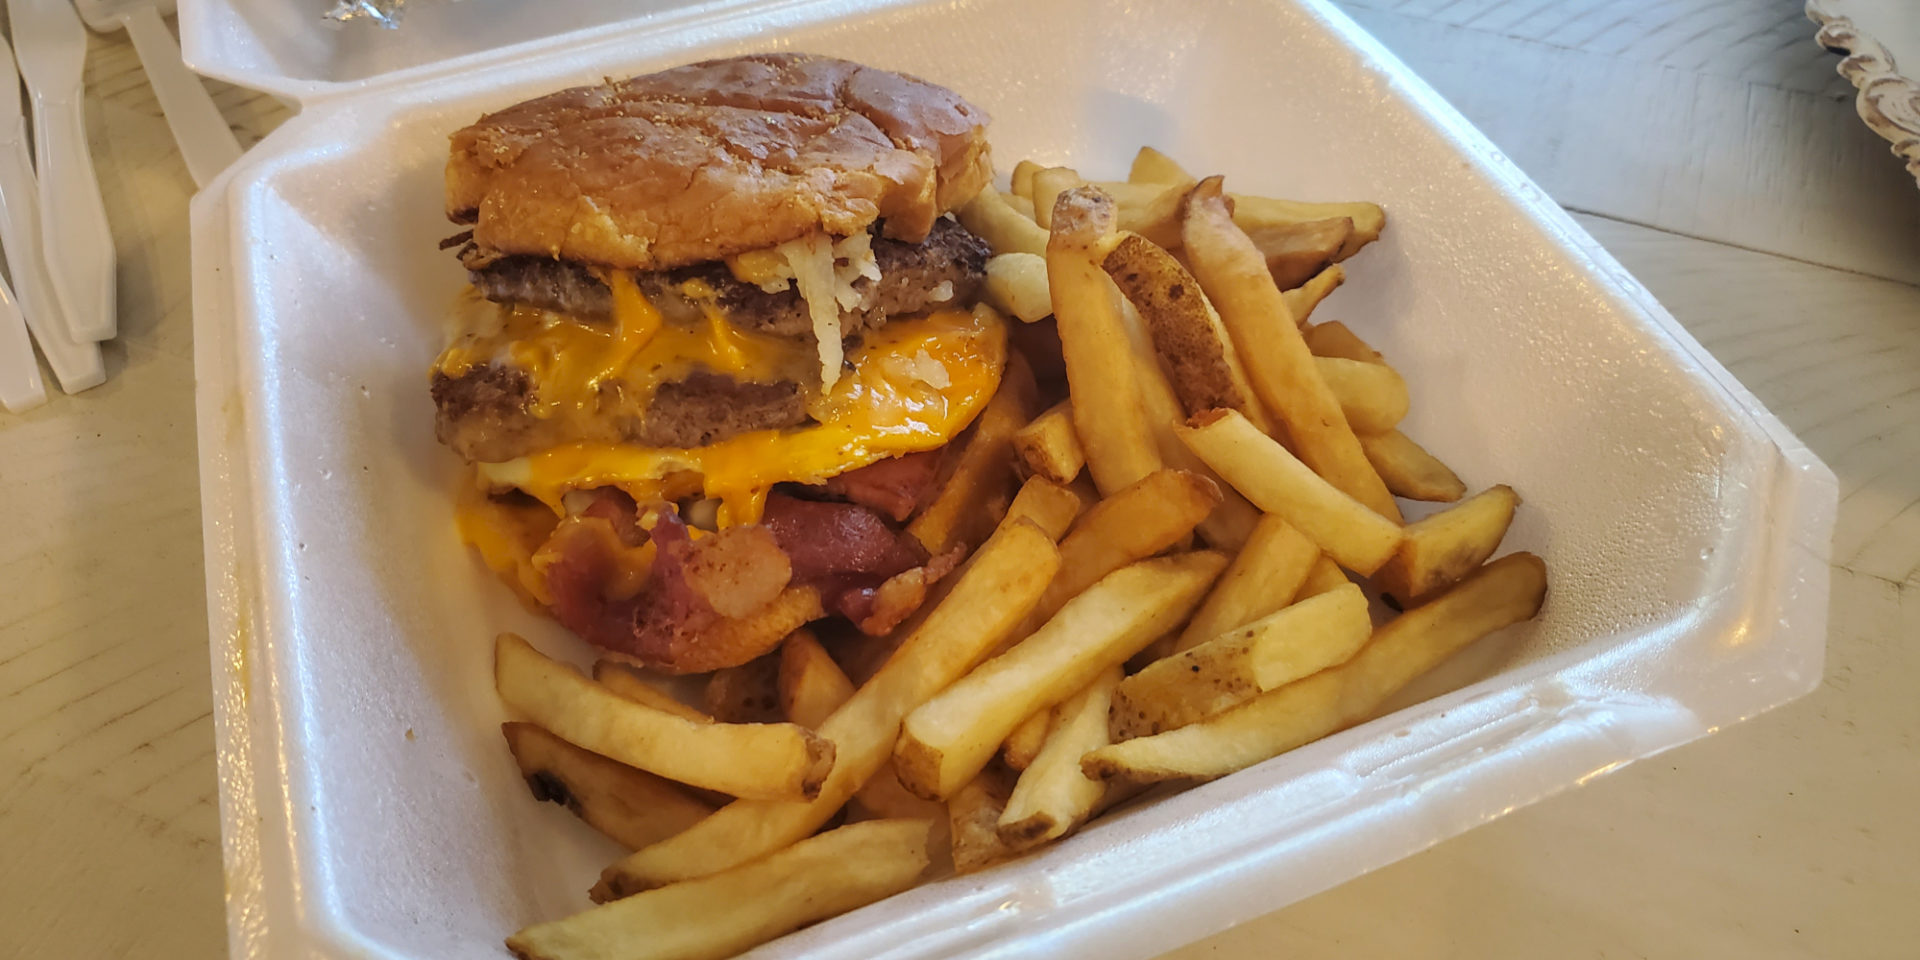 A takeout burger and fries from Four Breakfast & More in Champaign.